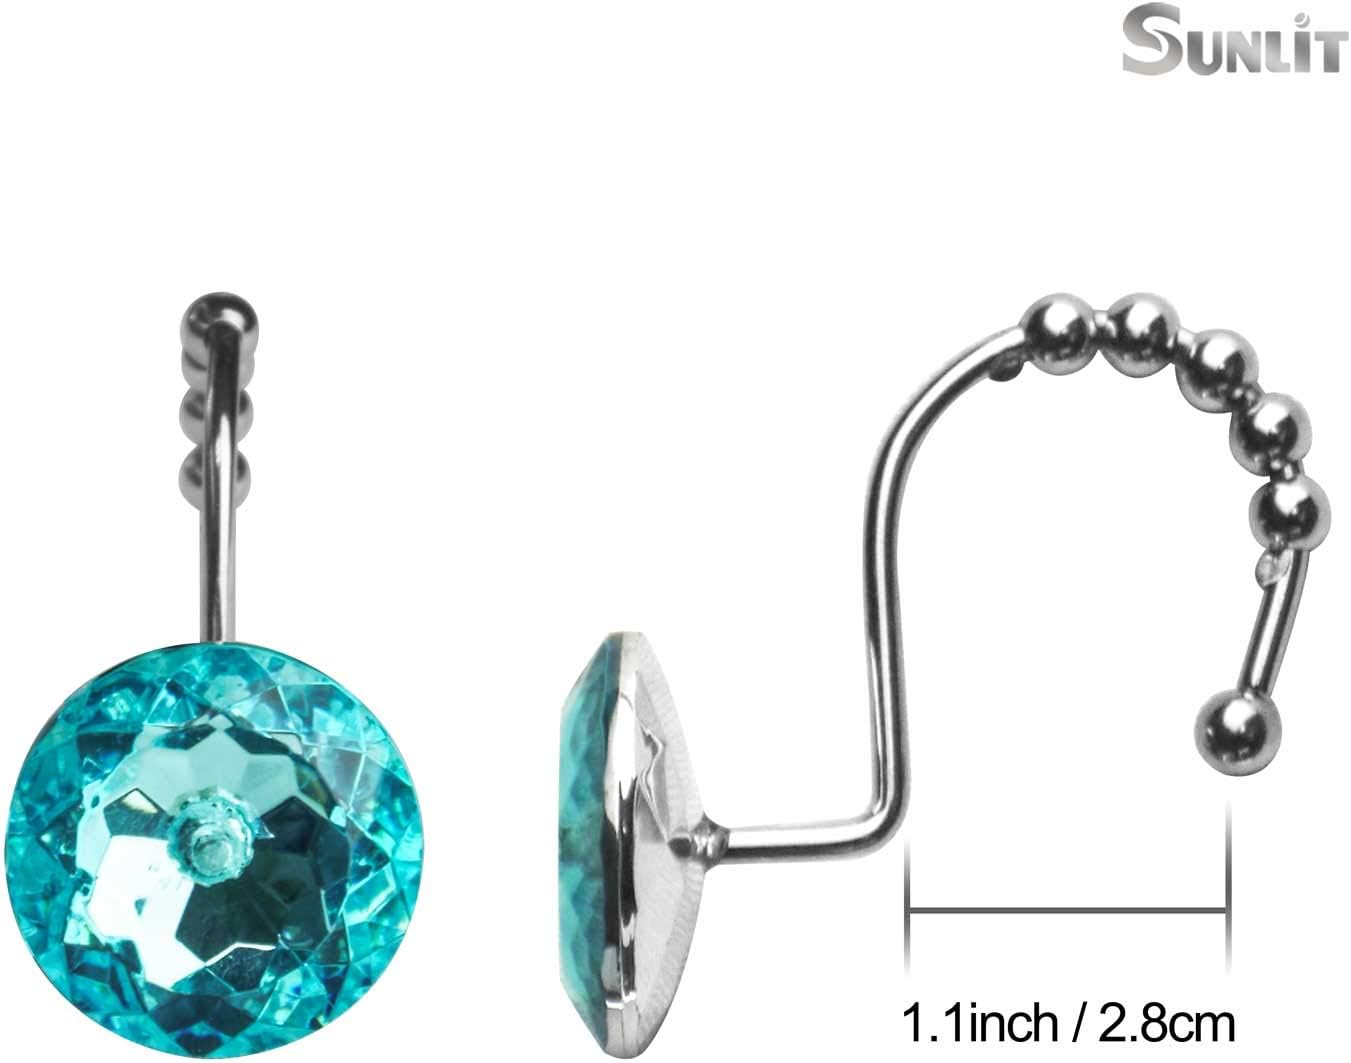 Sunlit Luxury Design Round Teal Blue Diamond Crystal Gem Bling with Glide Balls Shower Curtain Hooks for Mermaid Shower Curtains, Rust Proof Metal Rhinestones Glam Shower Curtain Rings-12 Pack